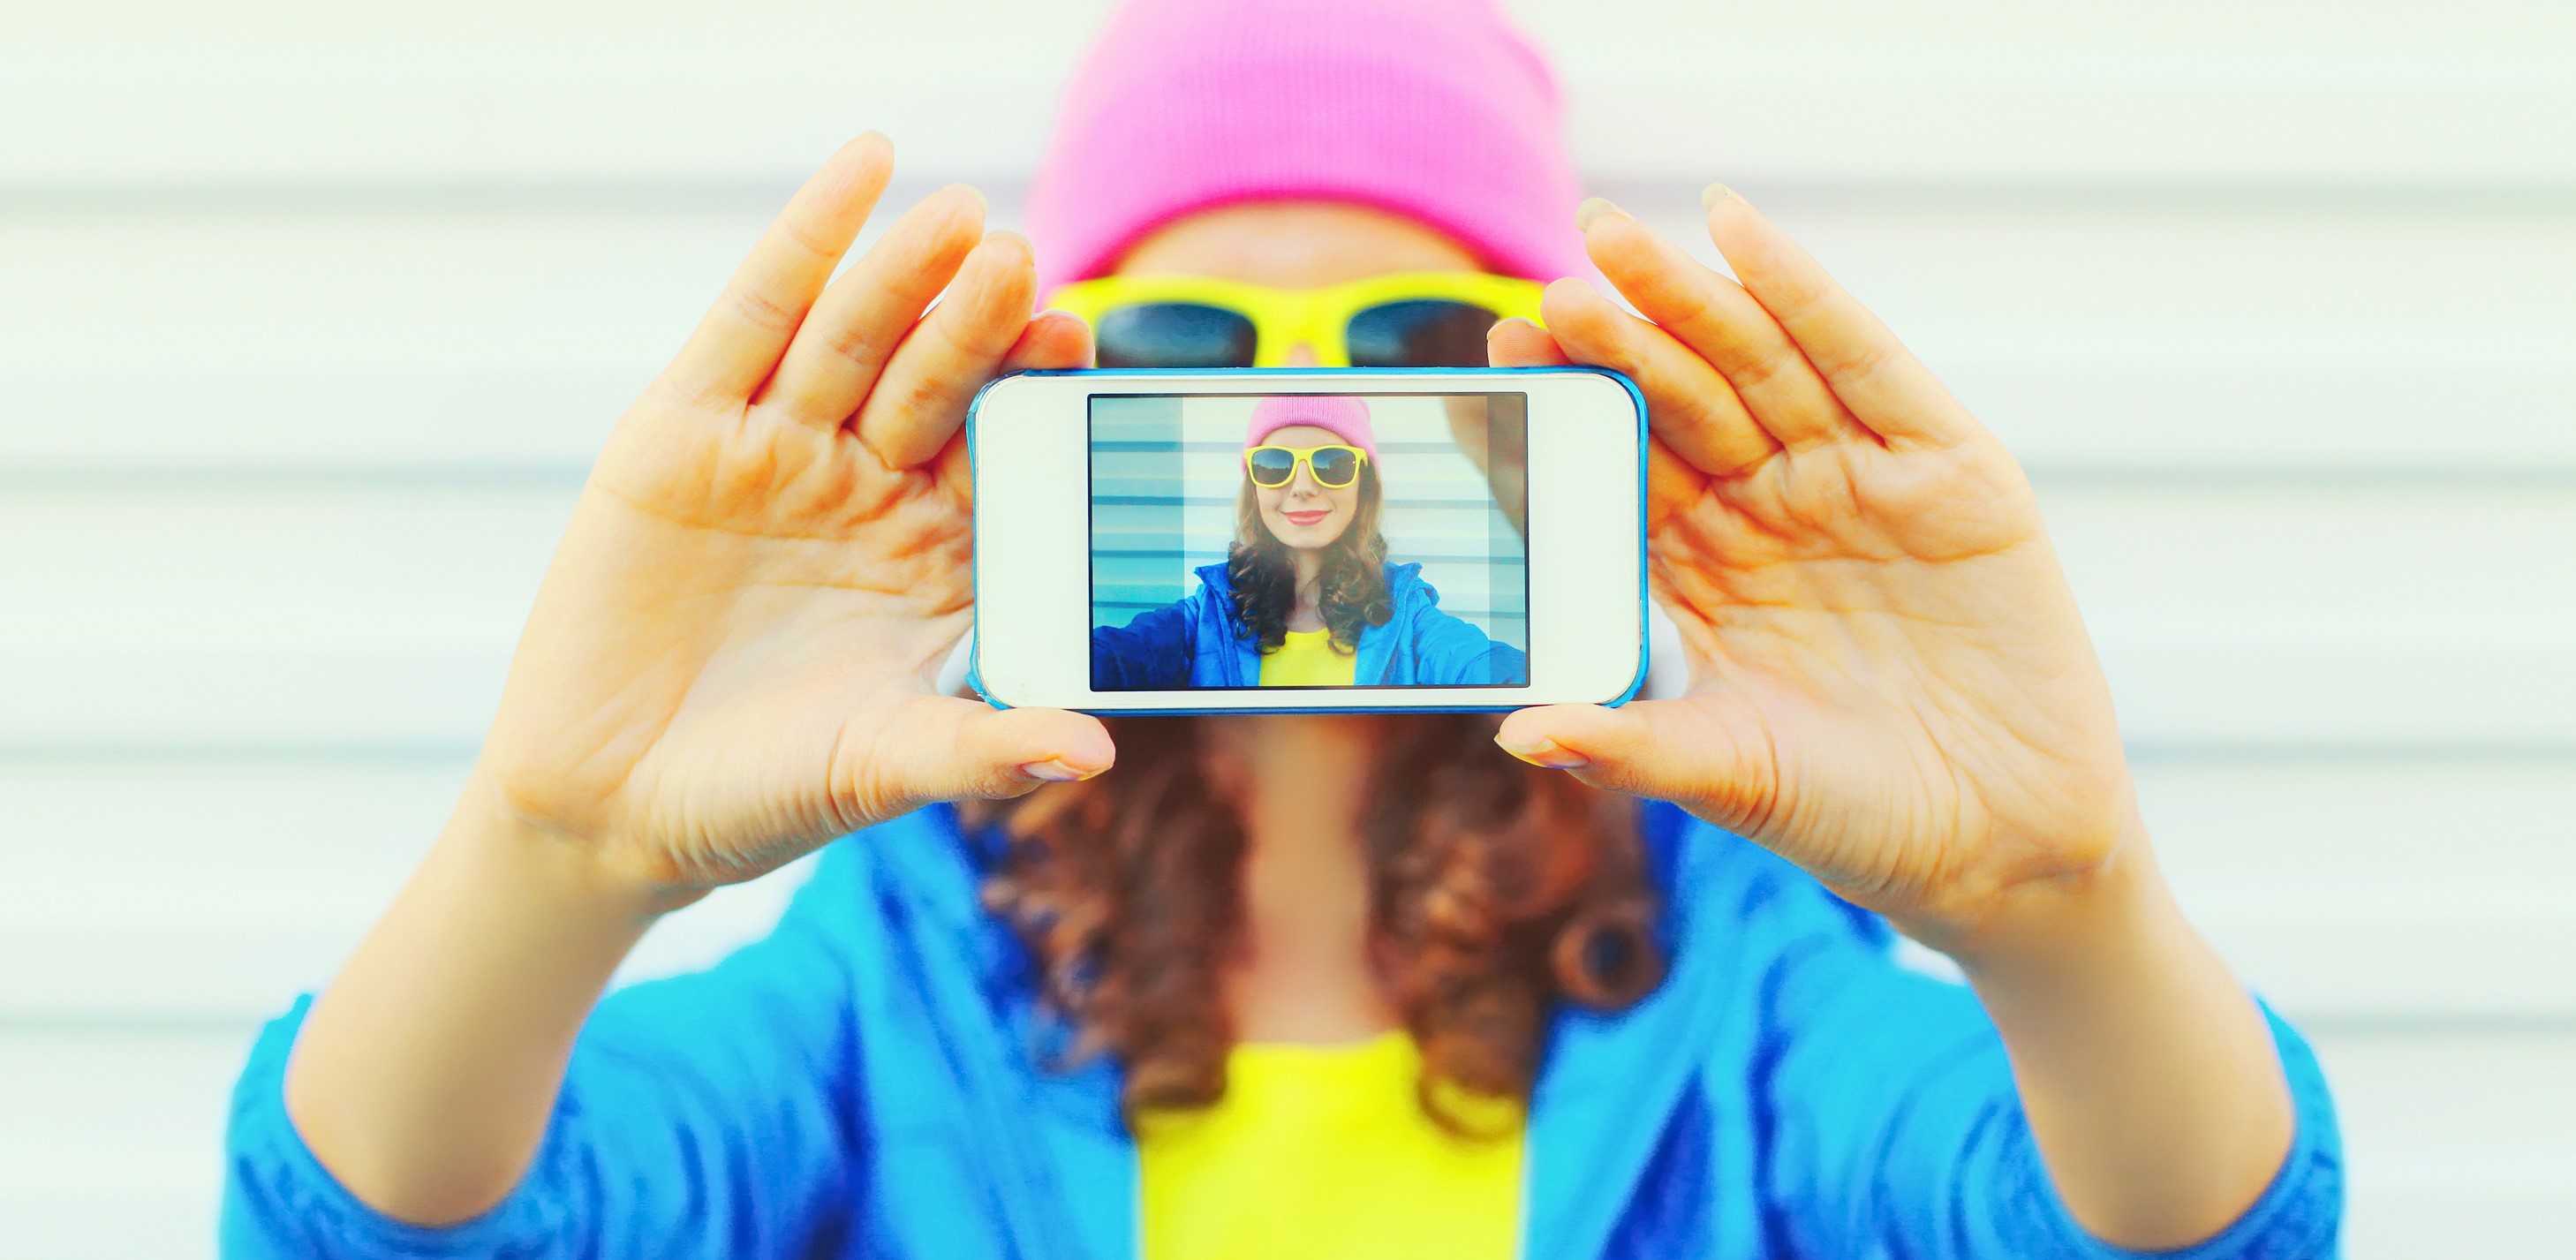 Fashion pretty cool girl taking photo self portrait on smartphone over white background wearing colorful clothes and sunglasses